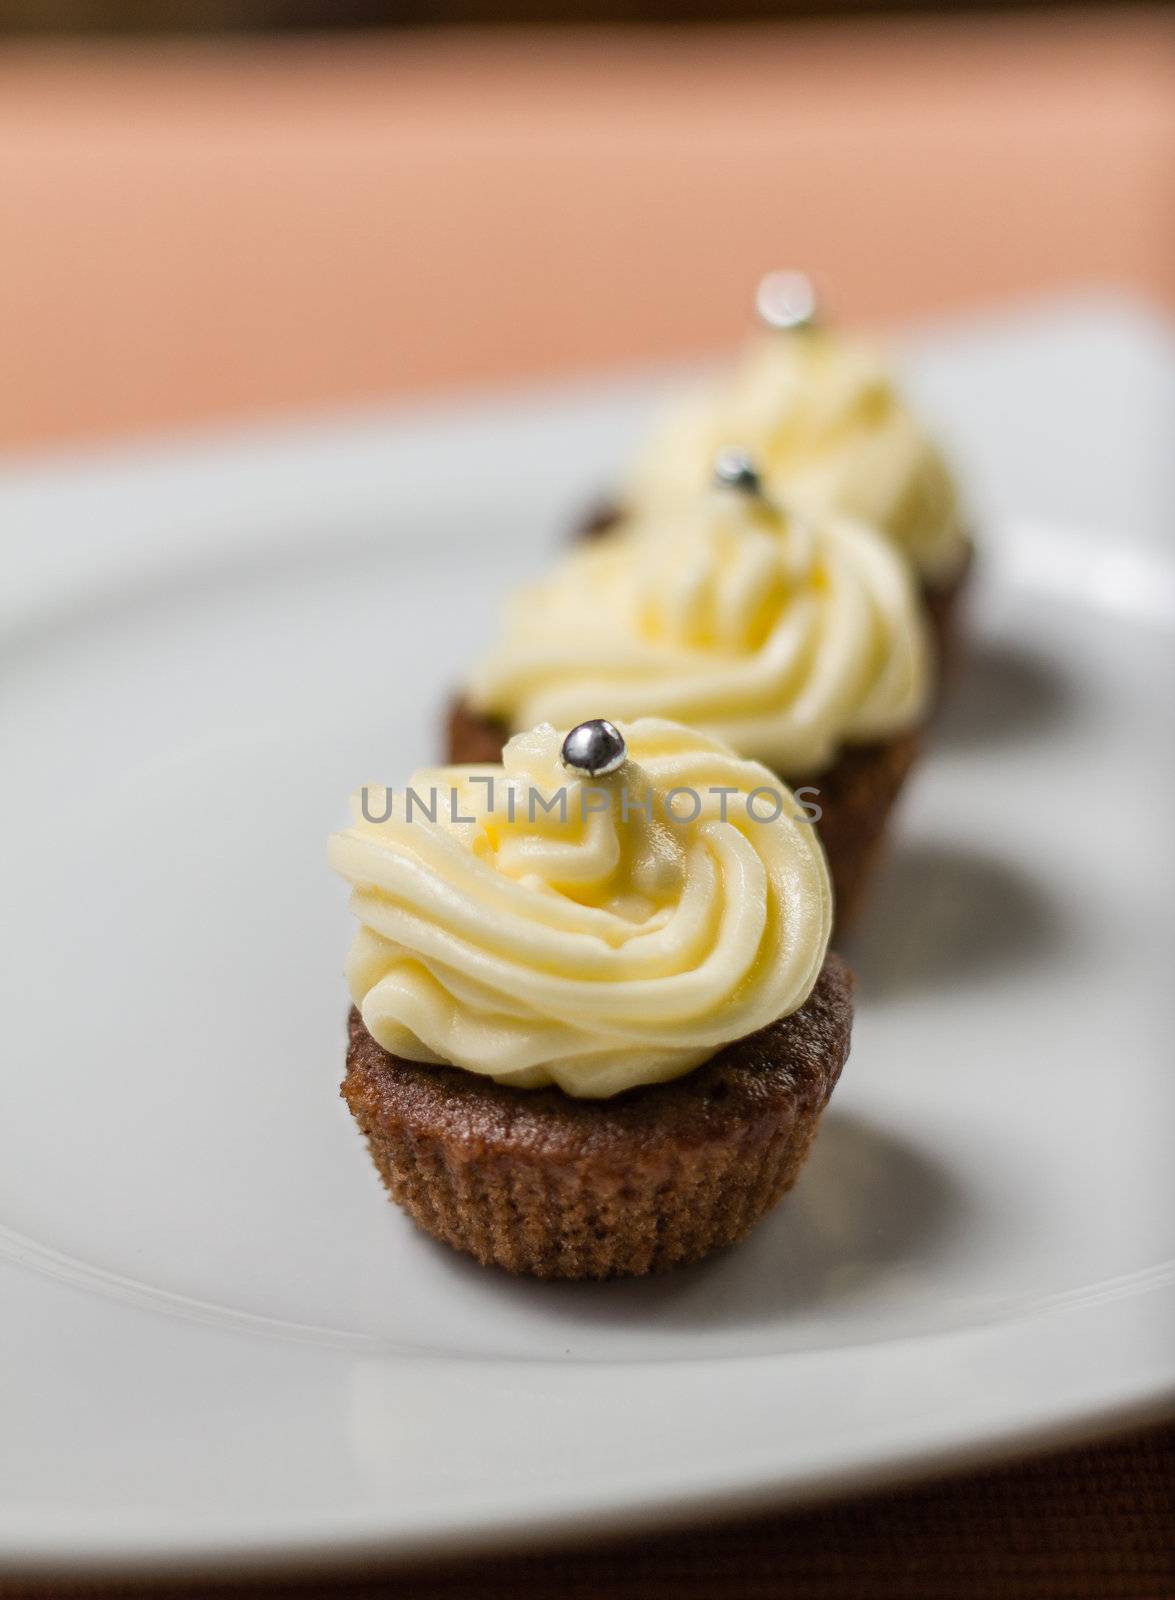 Three chocolate cupcakes with silver sprinkles on top, on white plate and fabric tablecloth